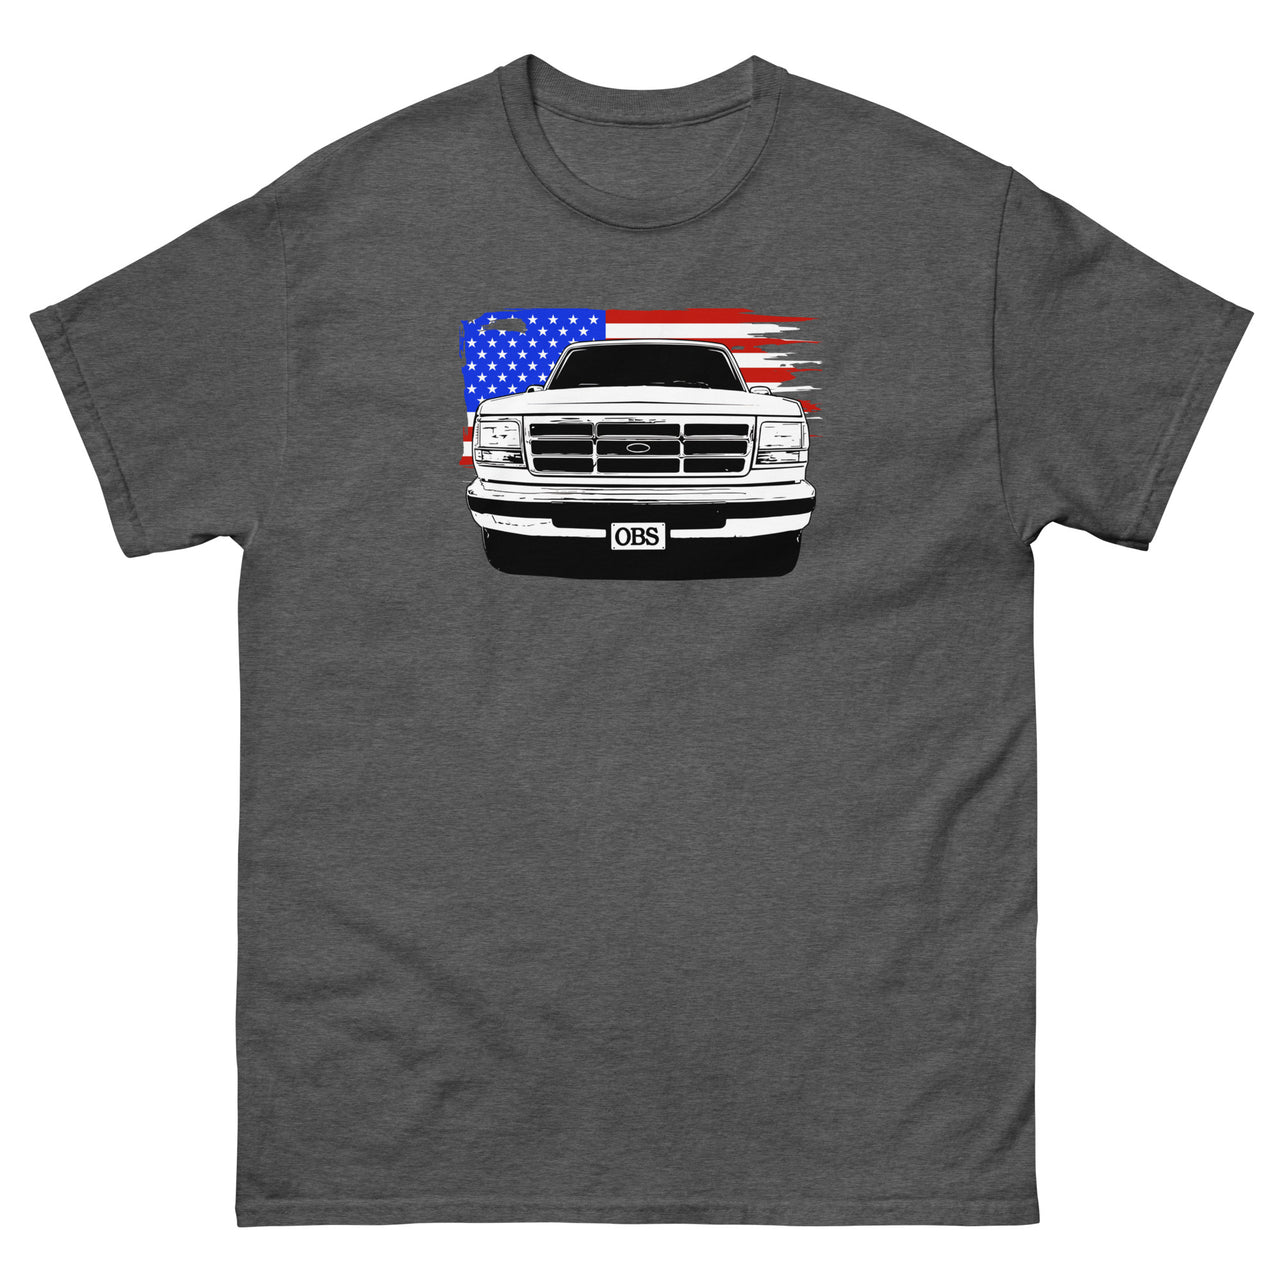 OBS Truck American Flag T-Shirt in grey